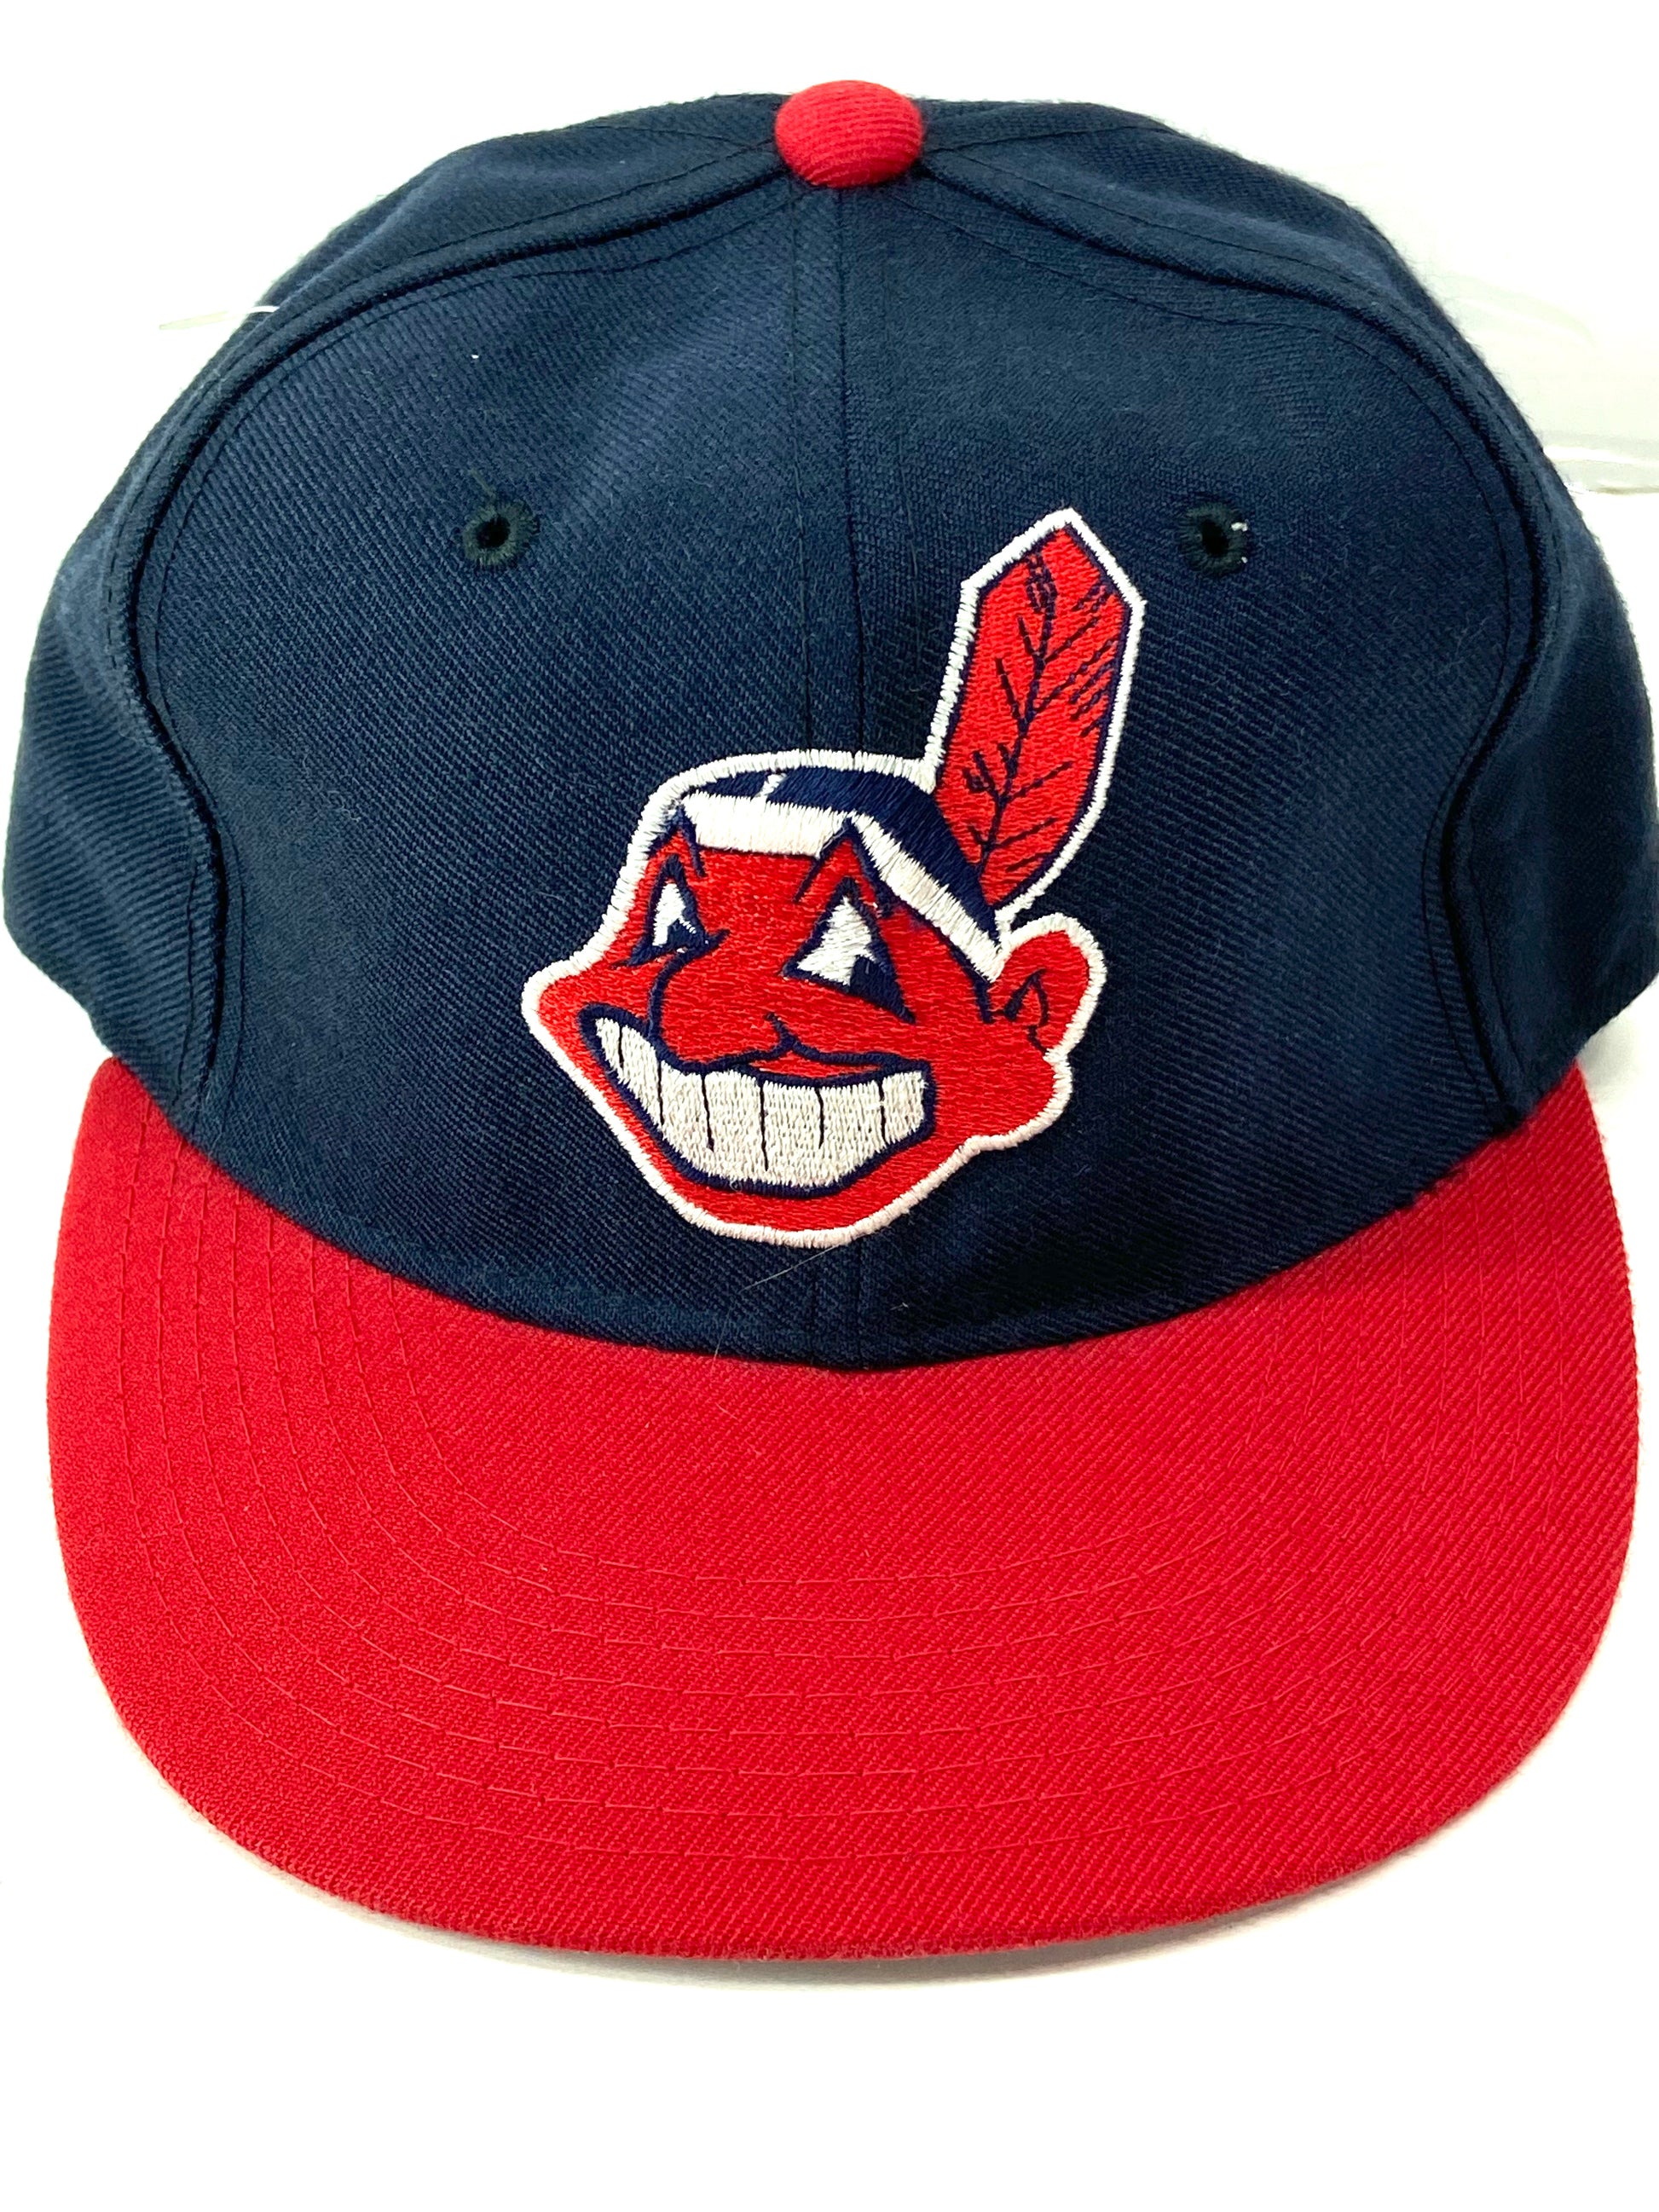 Wool Blend Fitted Old Cleveland Indians 1948 Style Wahoo Golf Hat Cap 7 3/8